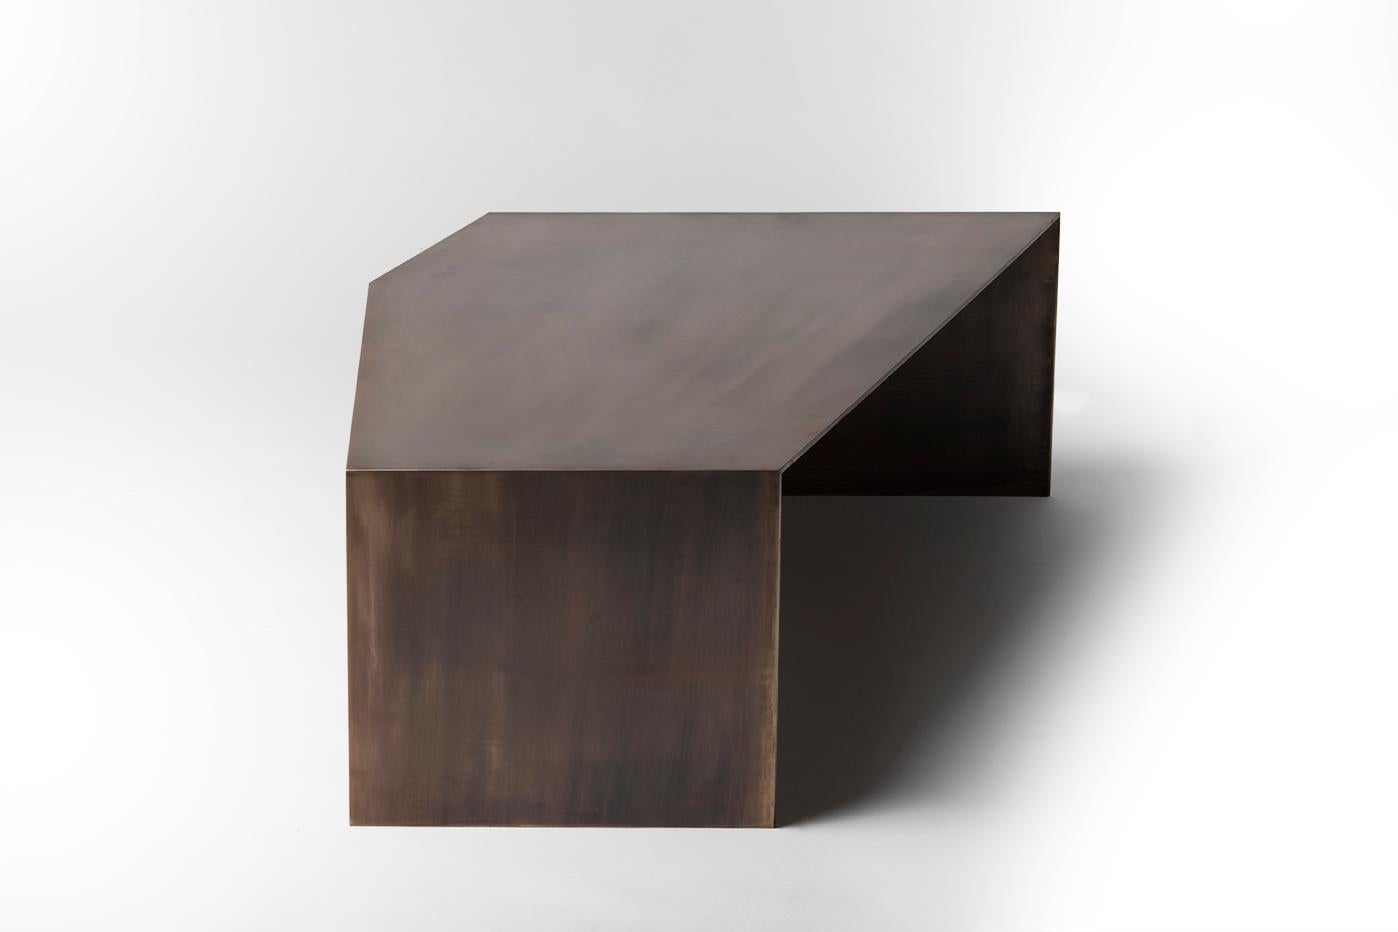 The ore coffee table by Taylor Donsker features a set of nesting tables, an organic table in California walnut and bronze, and a geometric table in bronze. 
 The two tables may be separated entirely or partially to suit a variety of living space